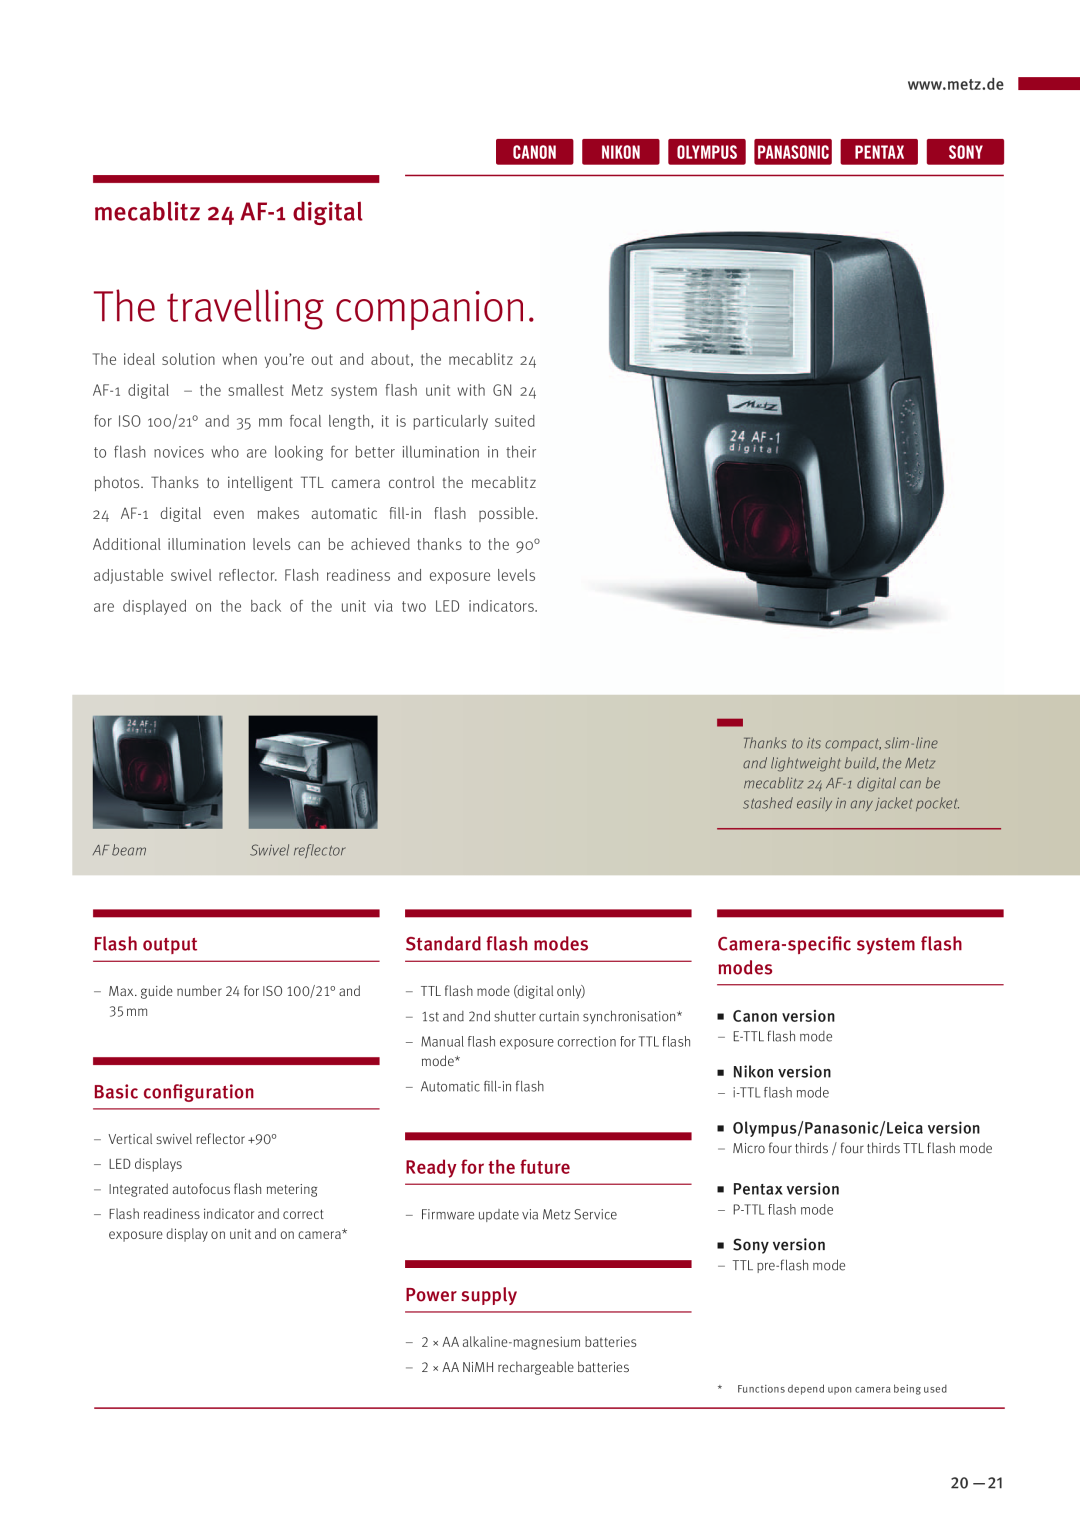 Metz MZ 44314N manual The travelling companion, mecablitz 24 AF-1 digital, Flash output, Basic configuration, Power supply 